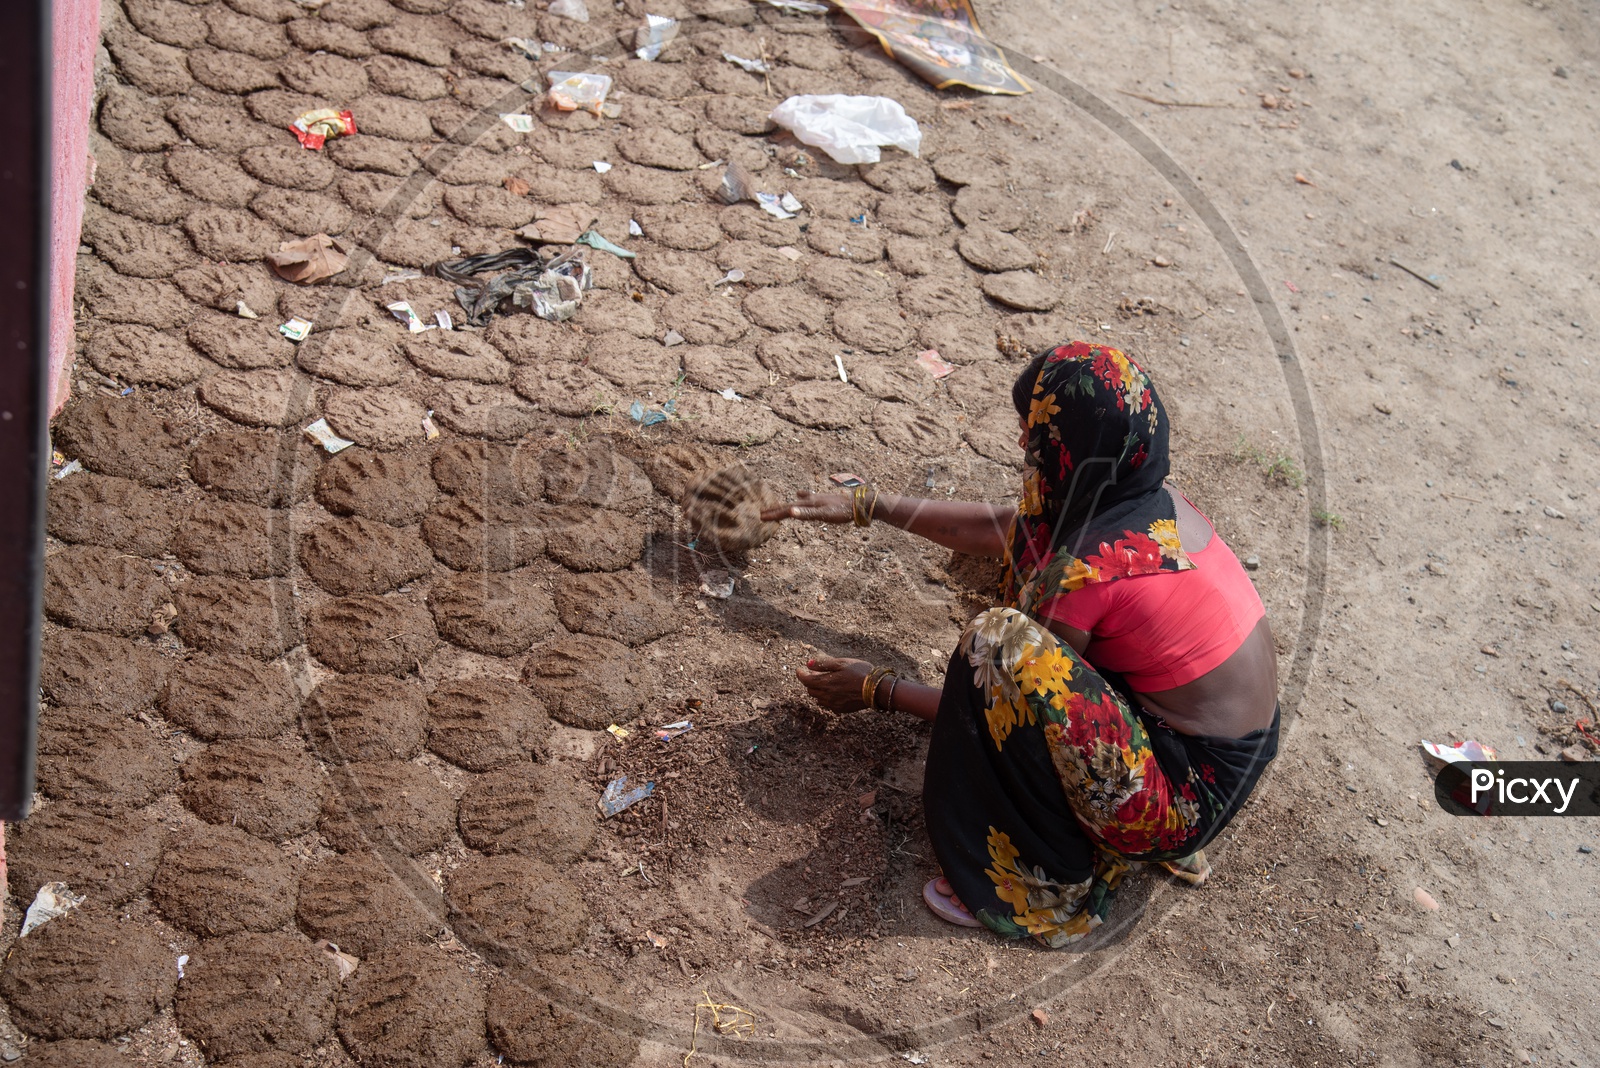 A Woman Making The Dry Dung Fuel or Dung Cakes  at Kangan Ghat or Chimney Ghat , Patna